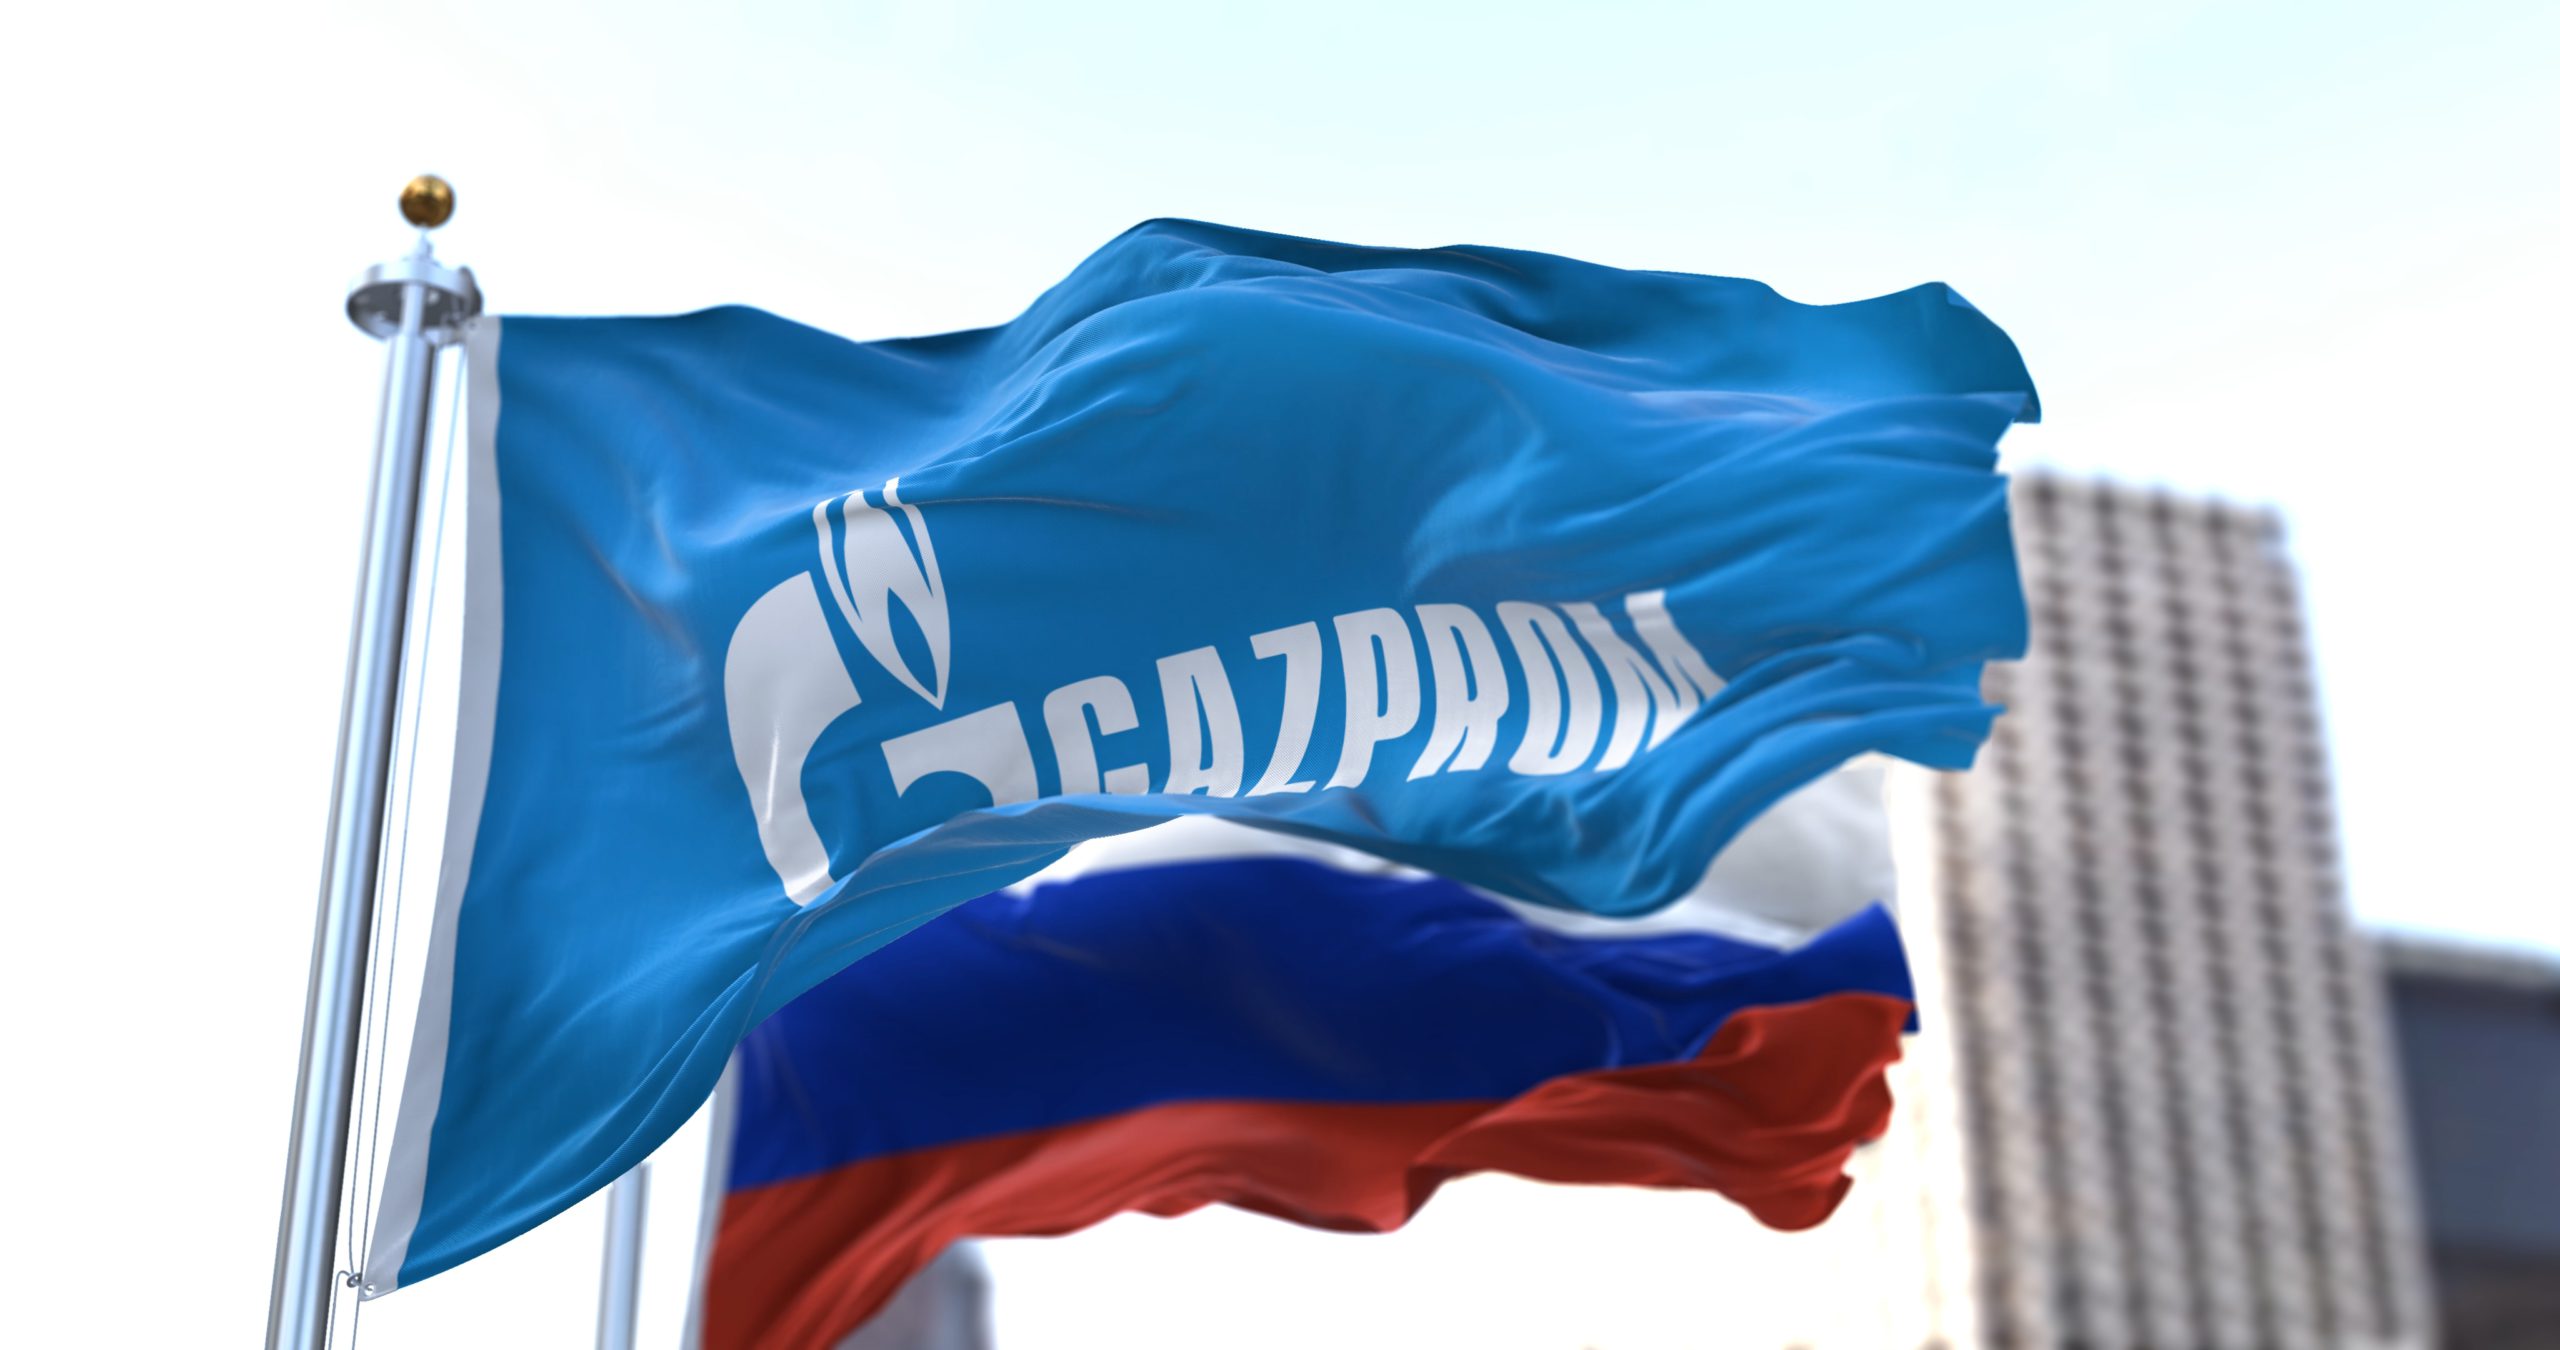 Gazprom announces Nord Stream 1 gas pipeline suspended indefinitely